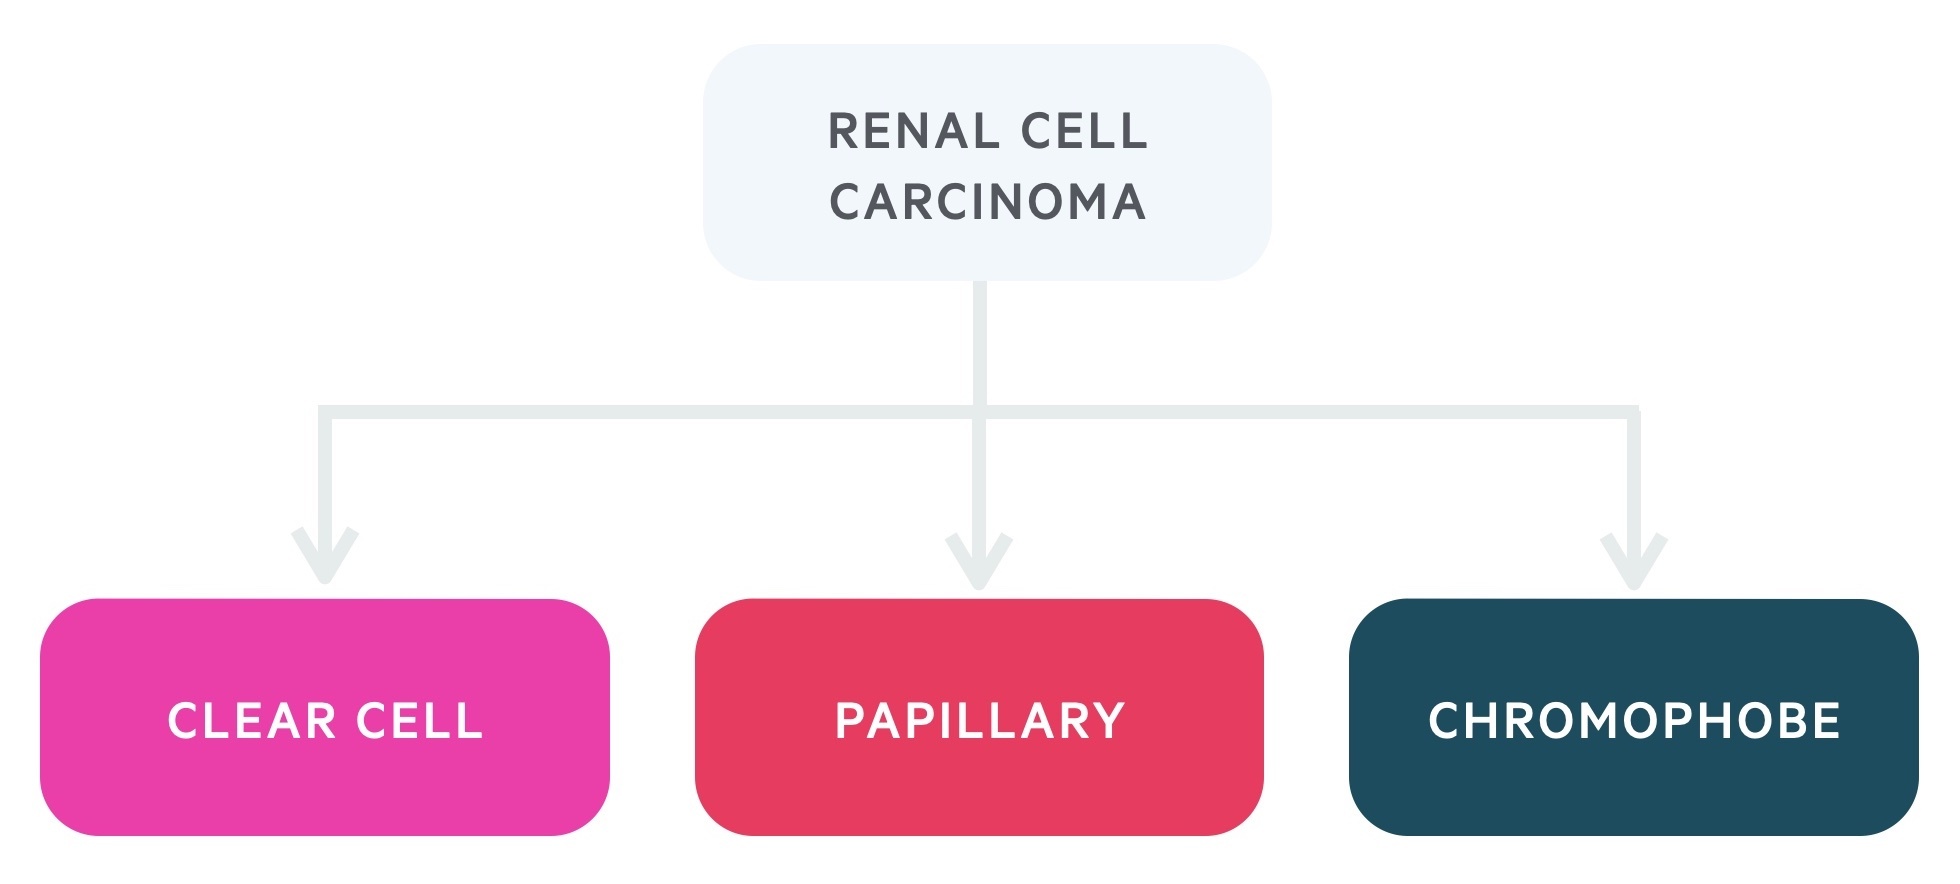 Types of renal cell cancer